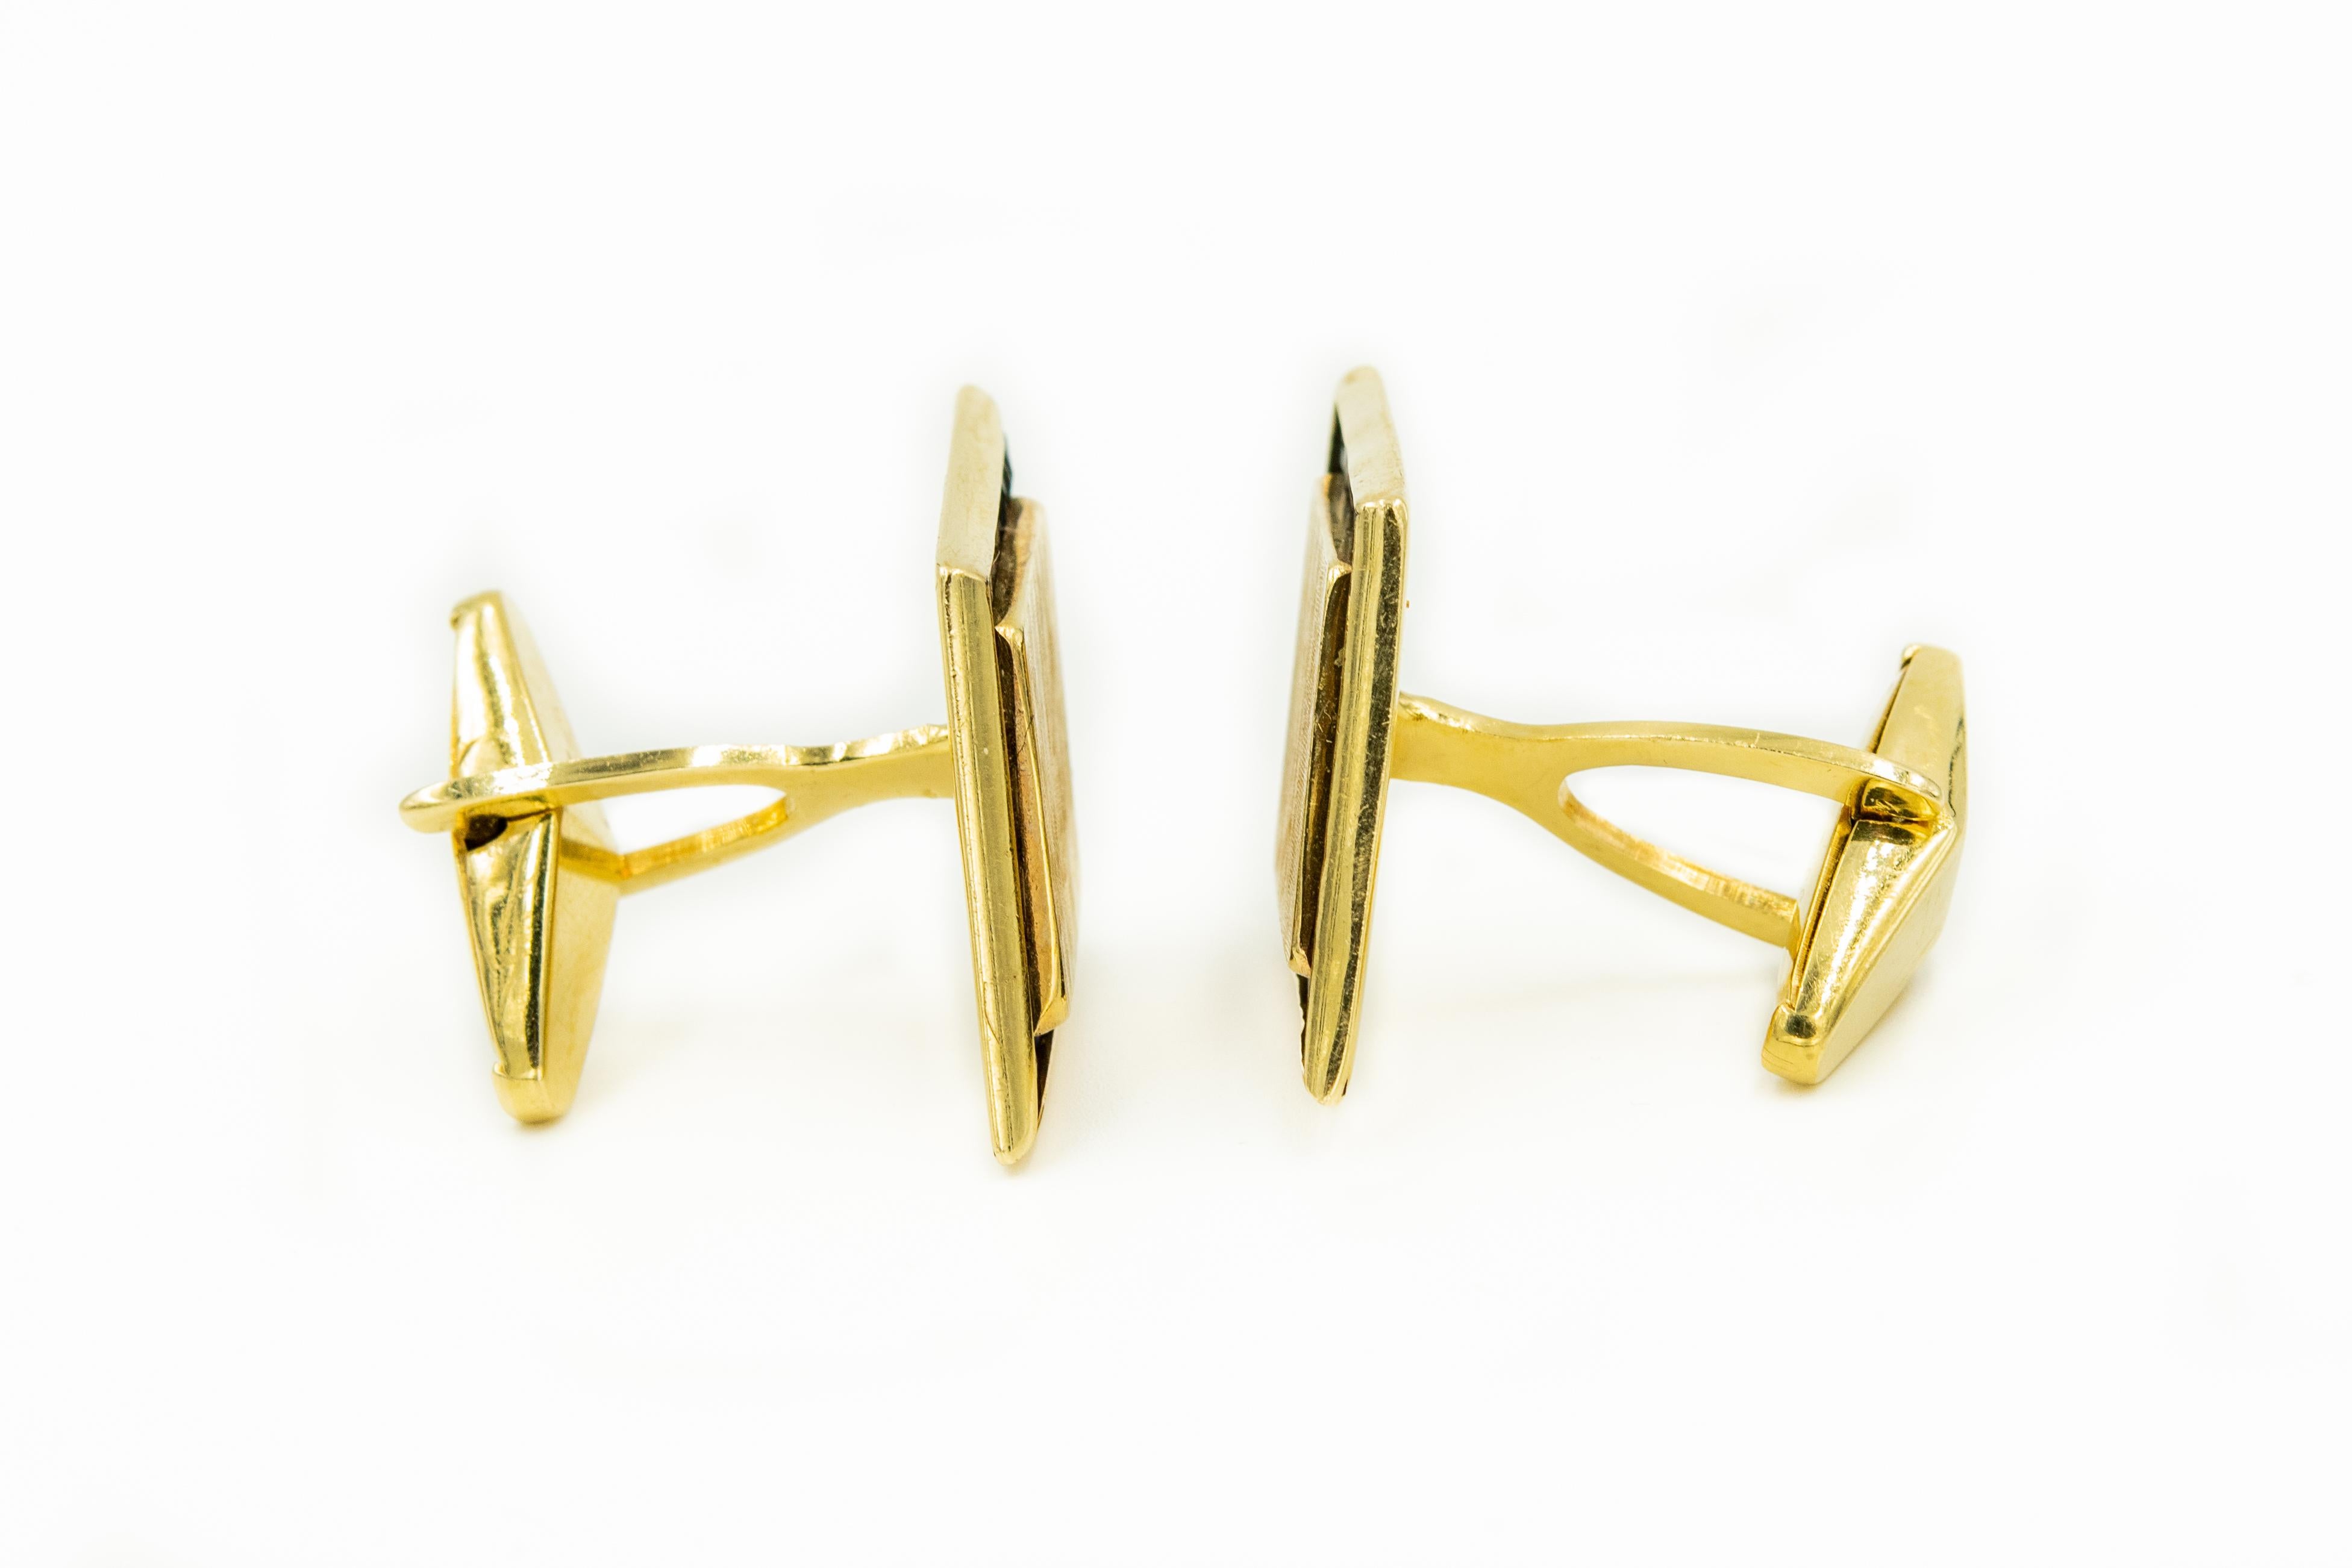 In 1944, Lucien Piccard began producing jewelry. These cufflinks featuring synthetic sapphires are one of the designs they were known for. The cuff links are 14k yellow gold with a florentine finished gold area in the middle where a monogram could